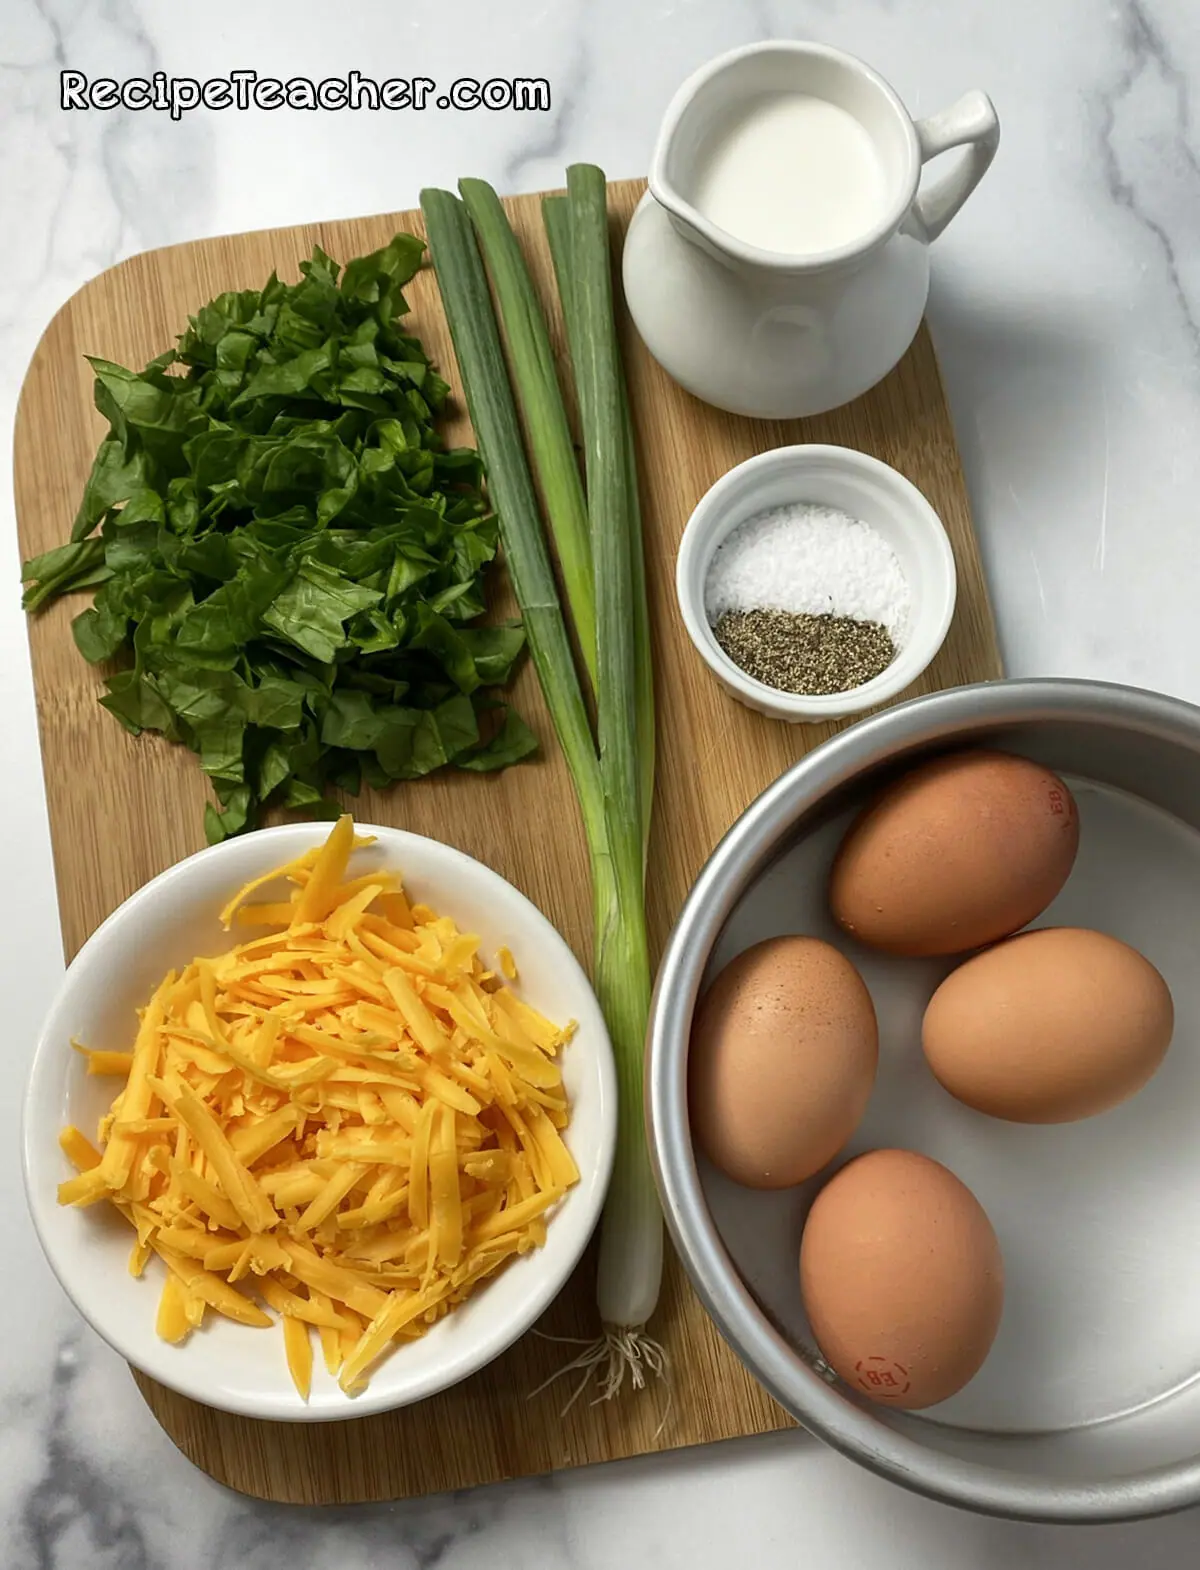 Ingredients for an air fryer breakfast frittata